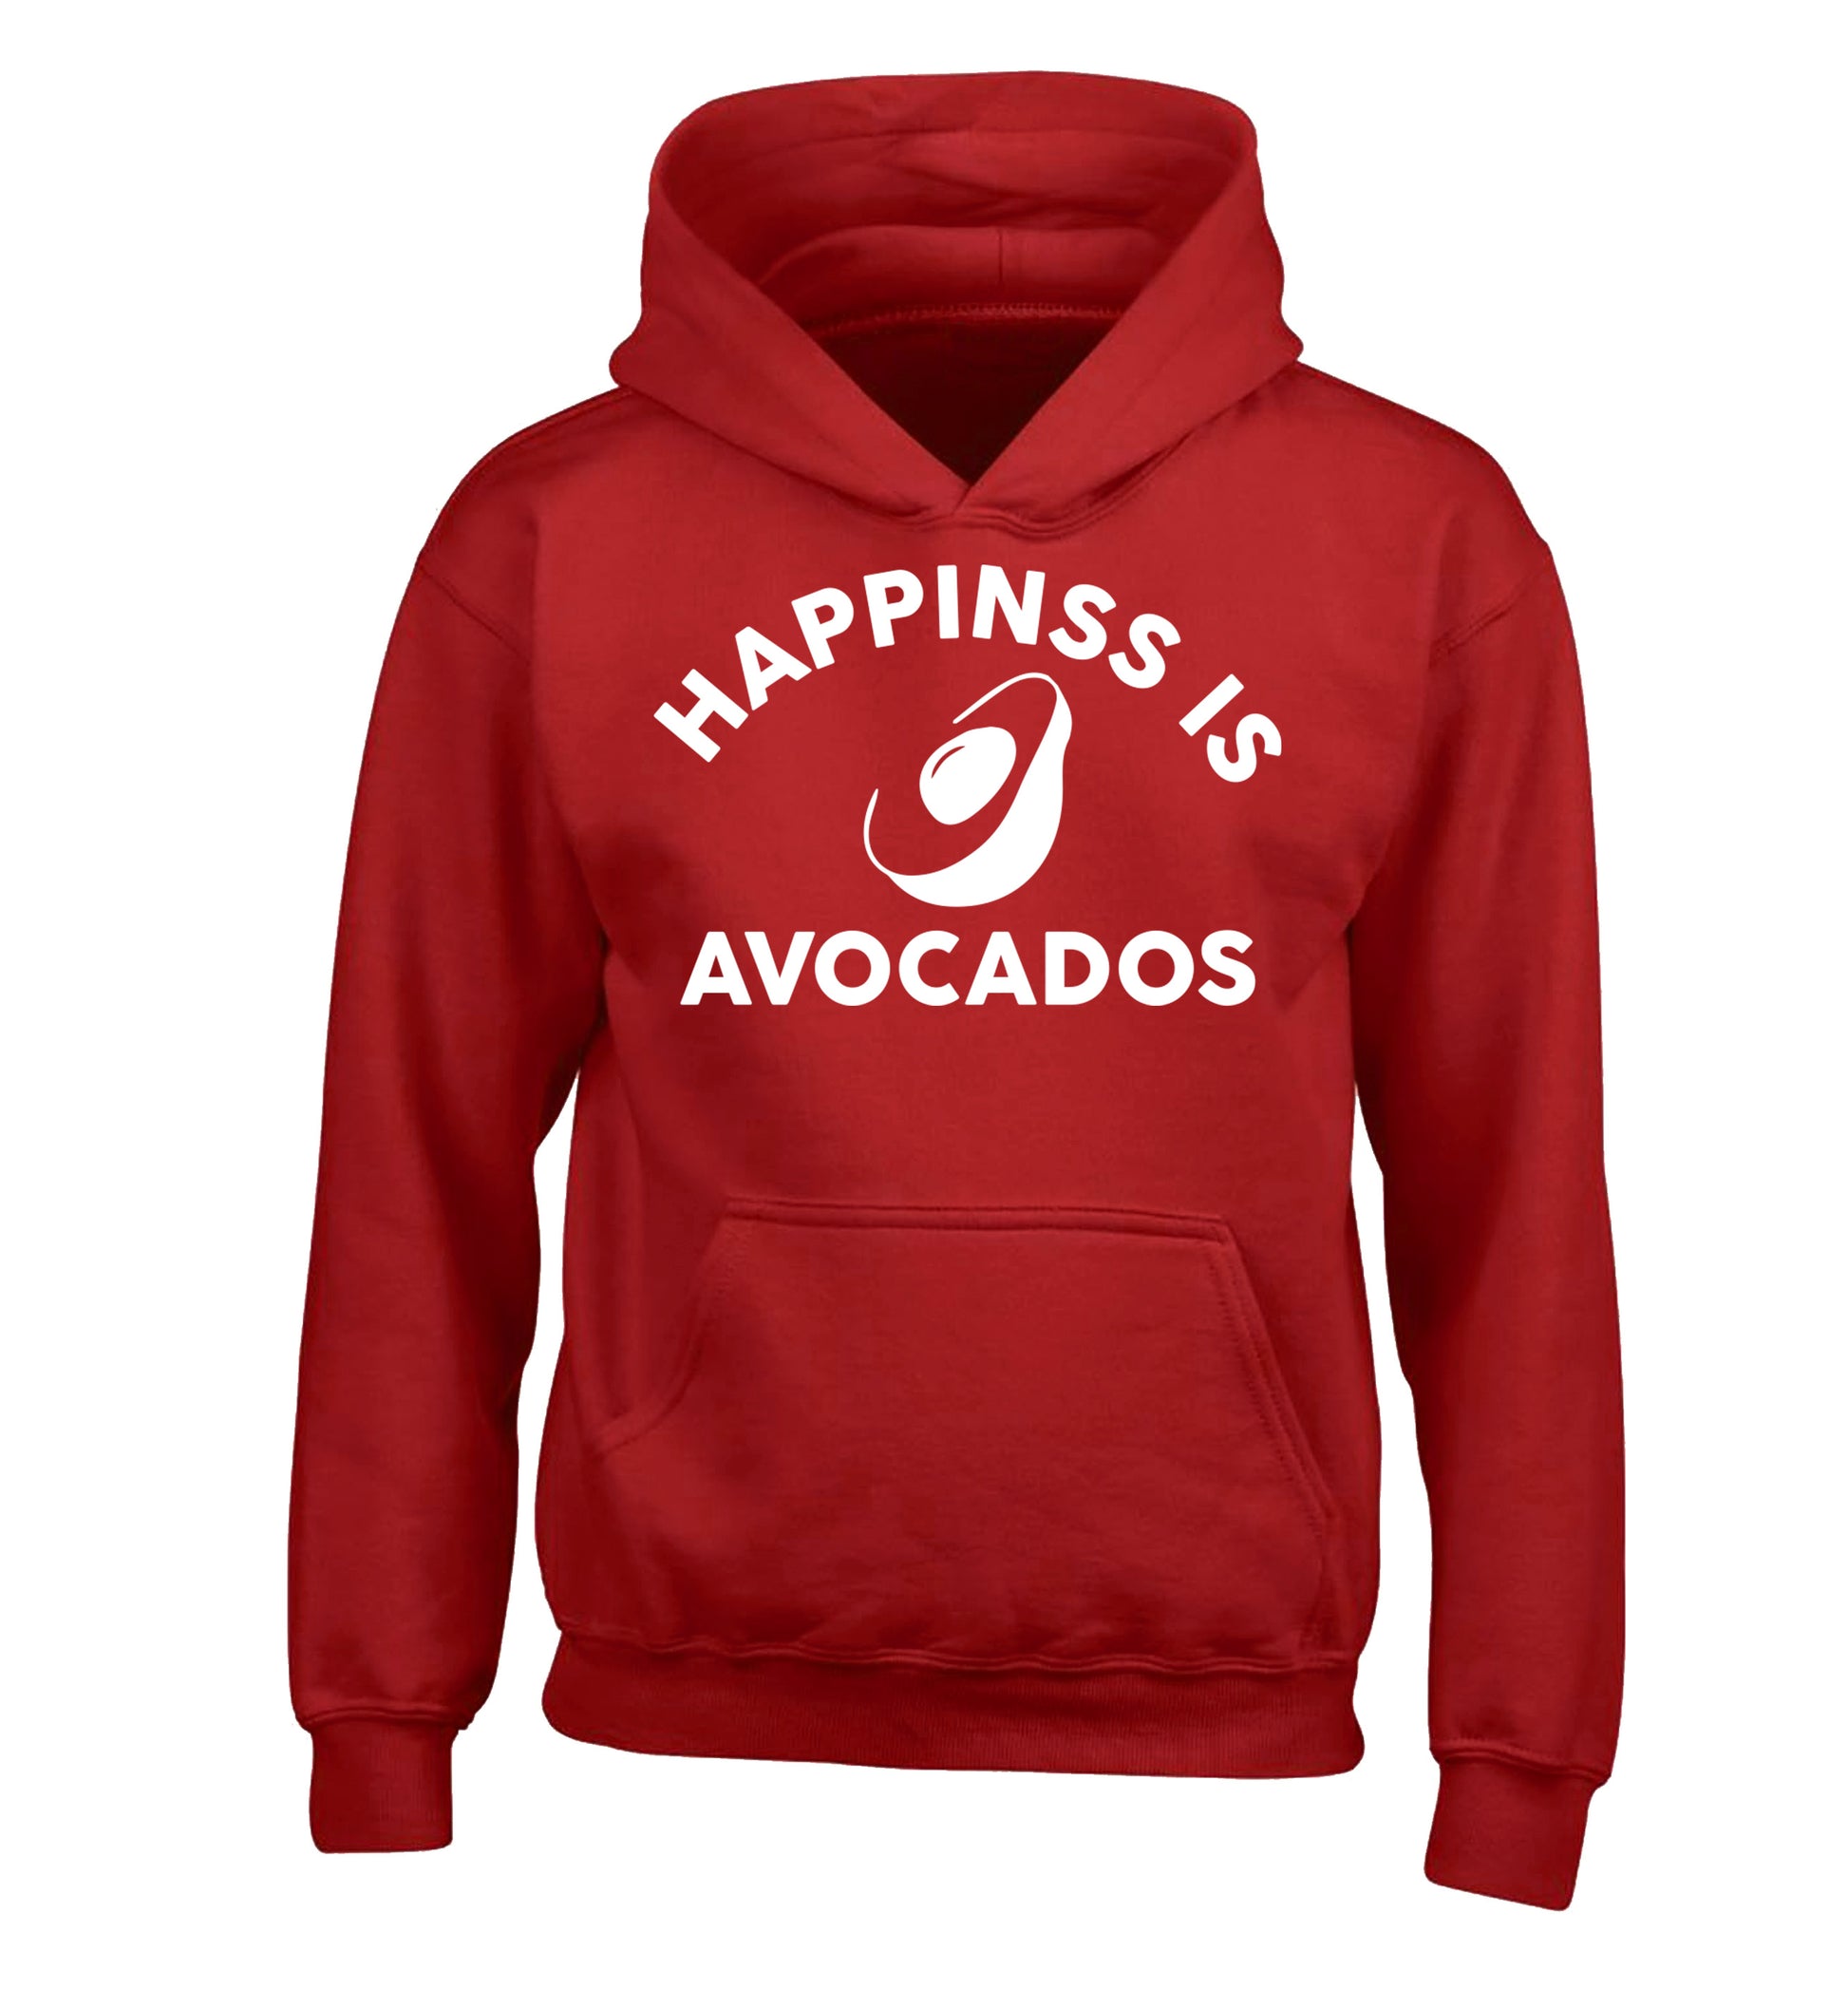 Happiness is avocados children's red hoodie 12-14 Years